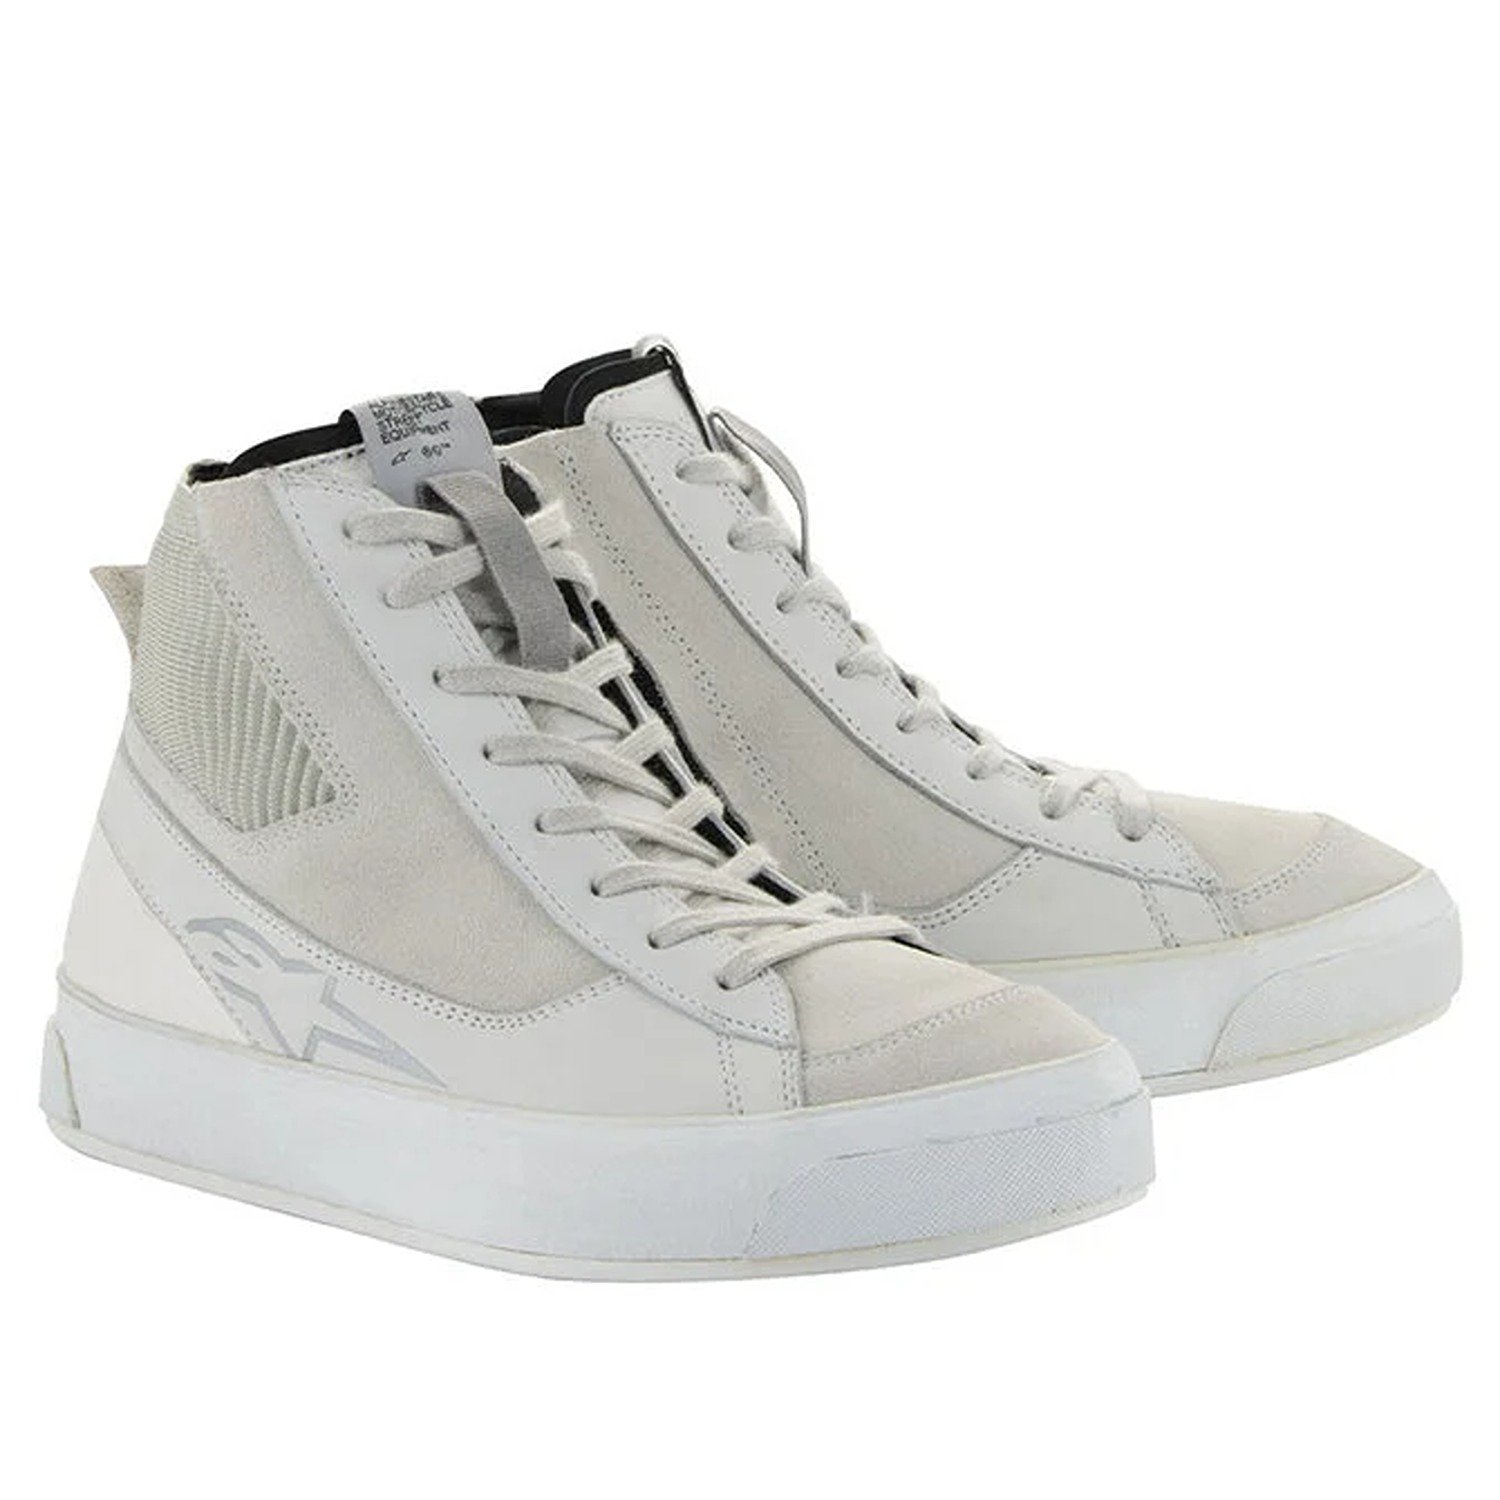 Image of Alpinestars Stated Shoes White Cool Gray Size US 12 EN